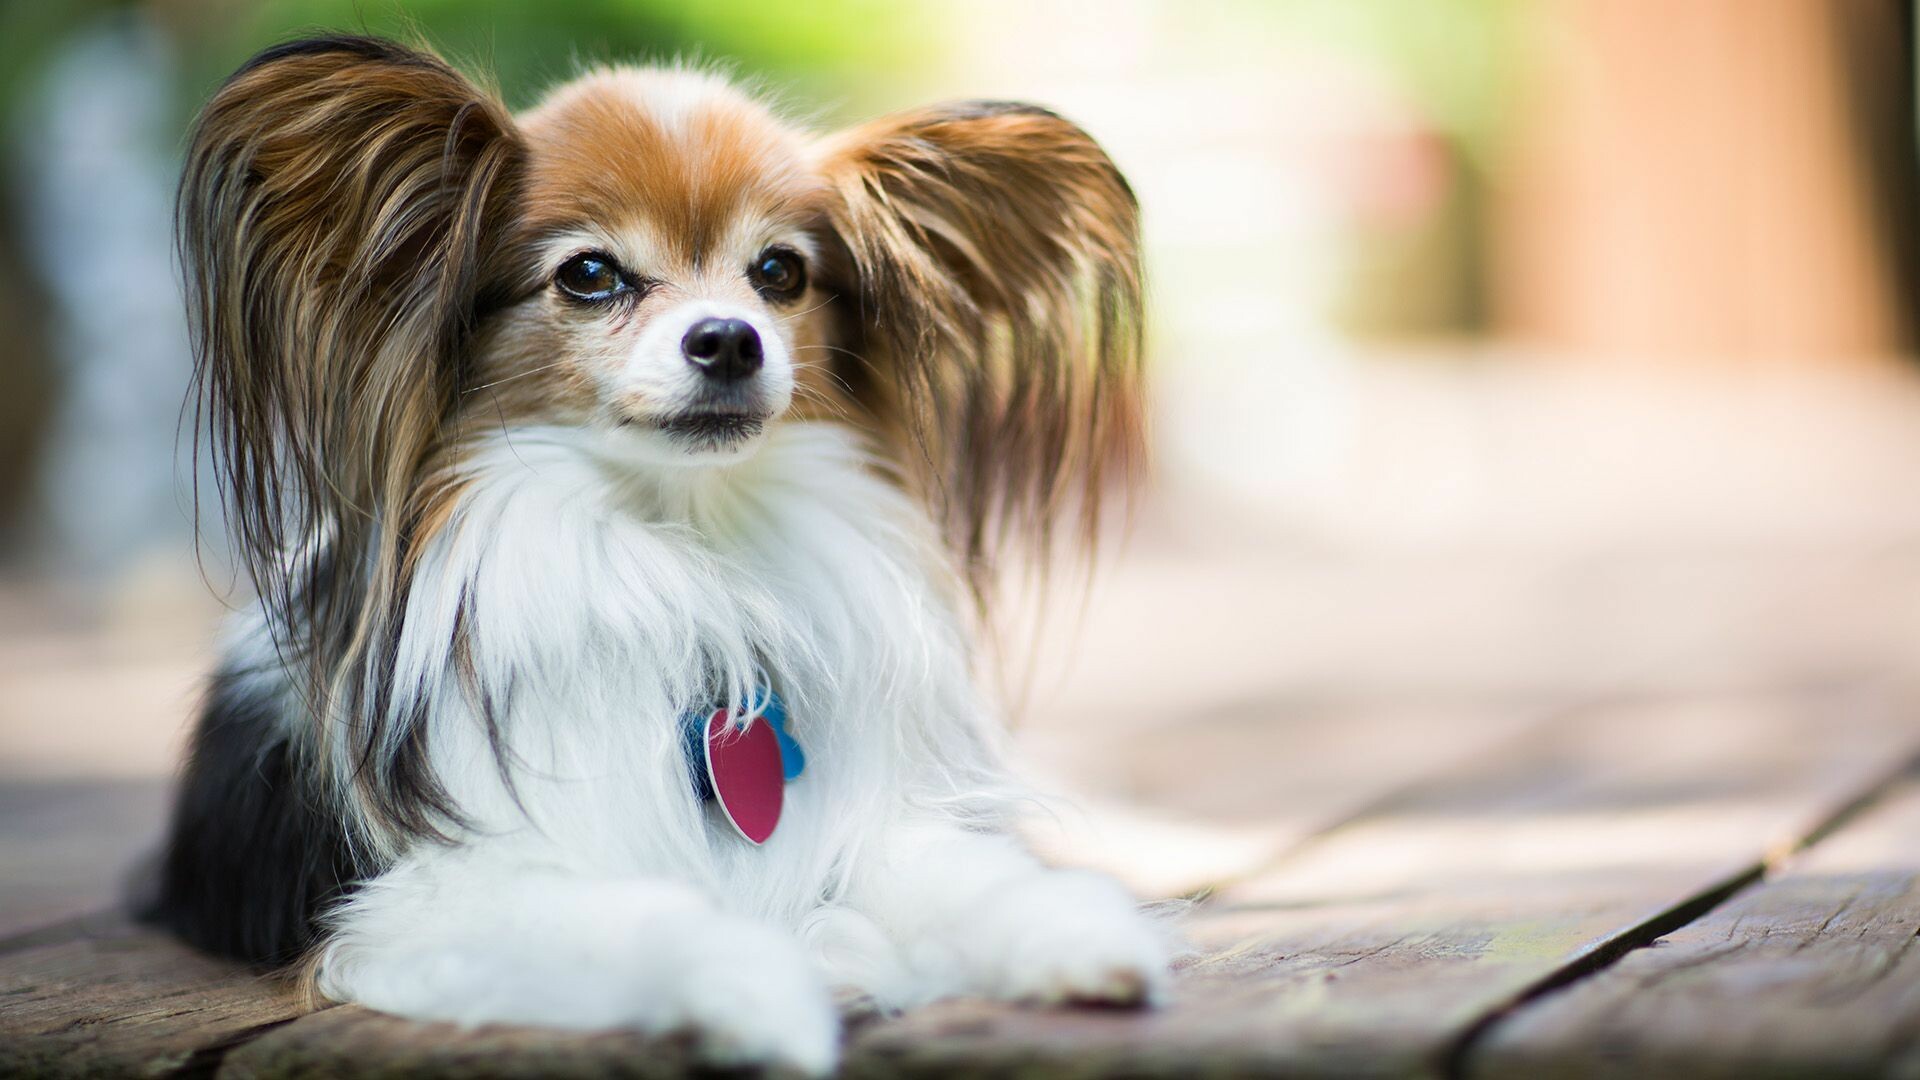 Papillon Dog: The breed is clearly shown in a family portrait of Louis XIV. 1920x1080 Full HD Wallpaper.